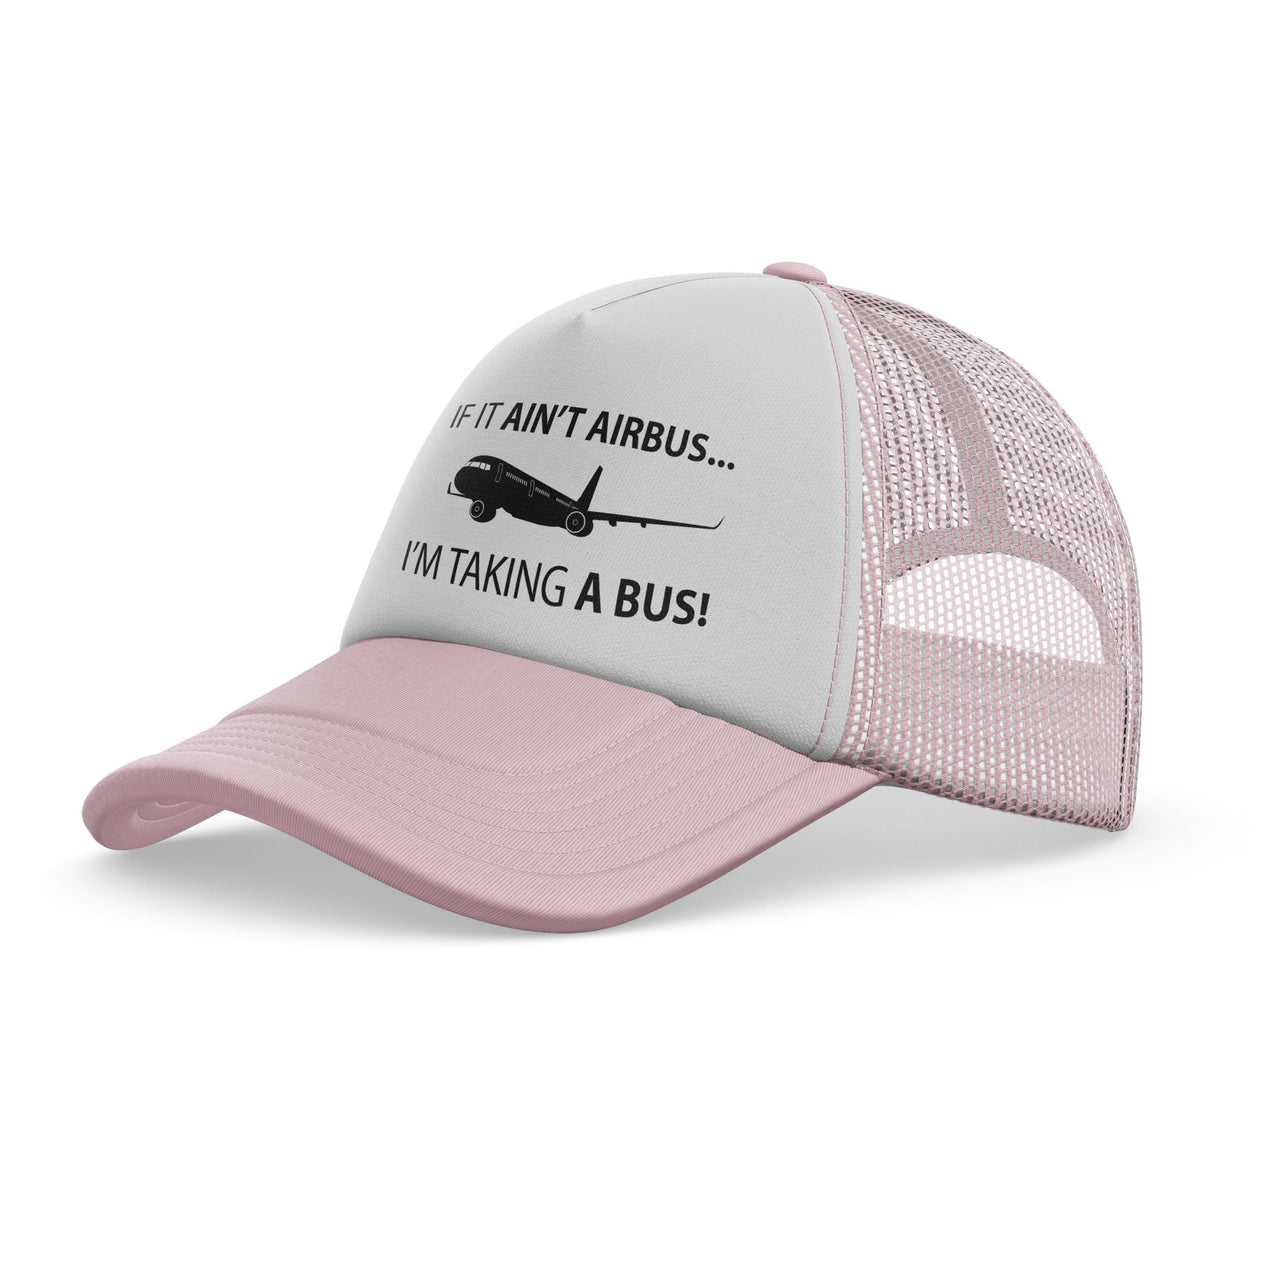 If It Ain't Airbus I'm Taking A Bus Designed Trucker Caps & Hats